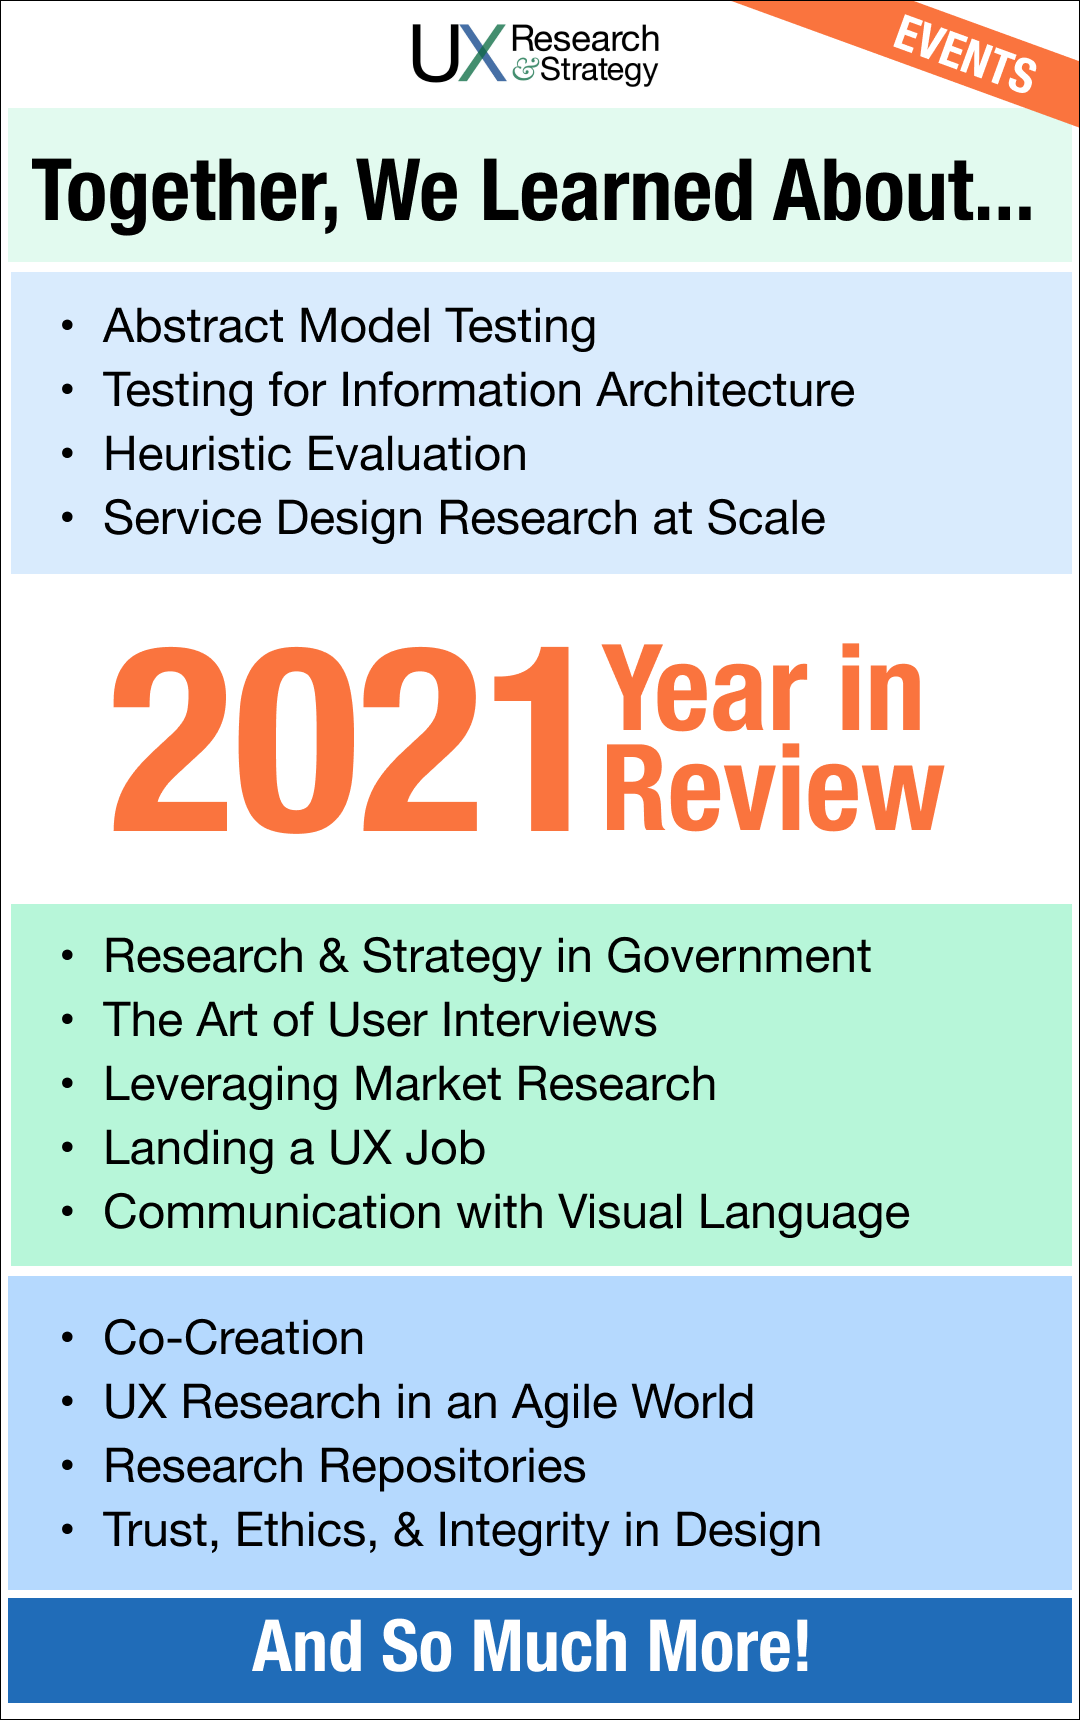 Graphic showing topics covered in  UXRS events in 2021.